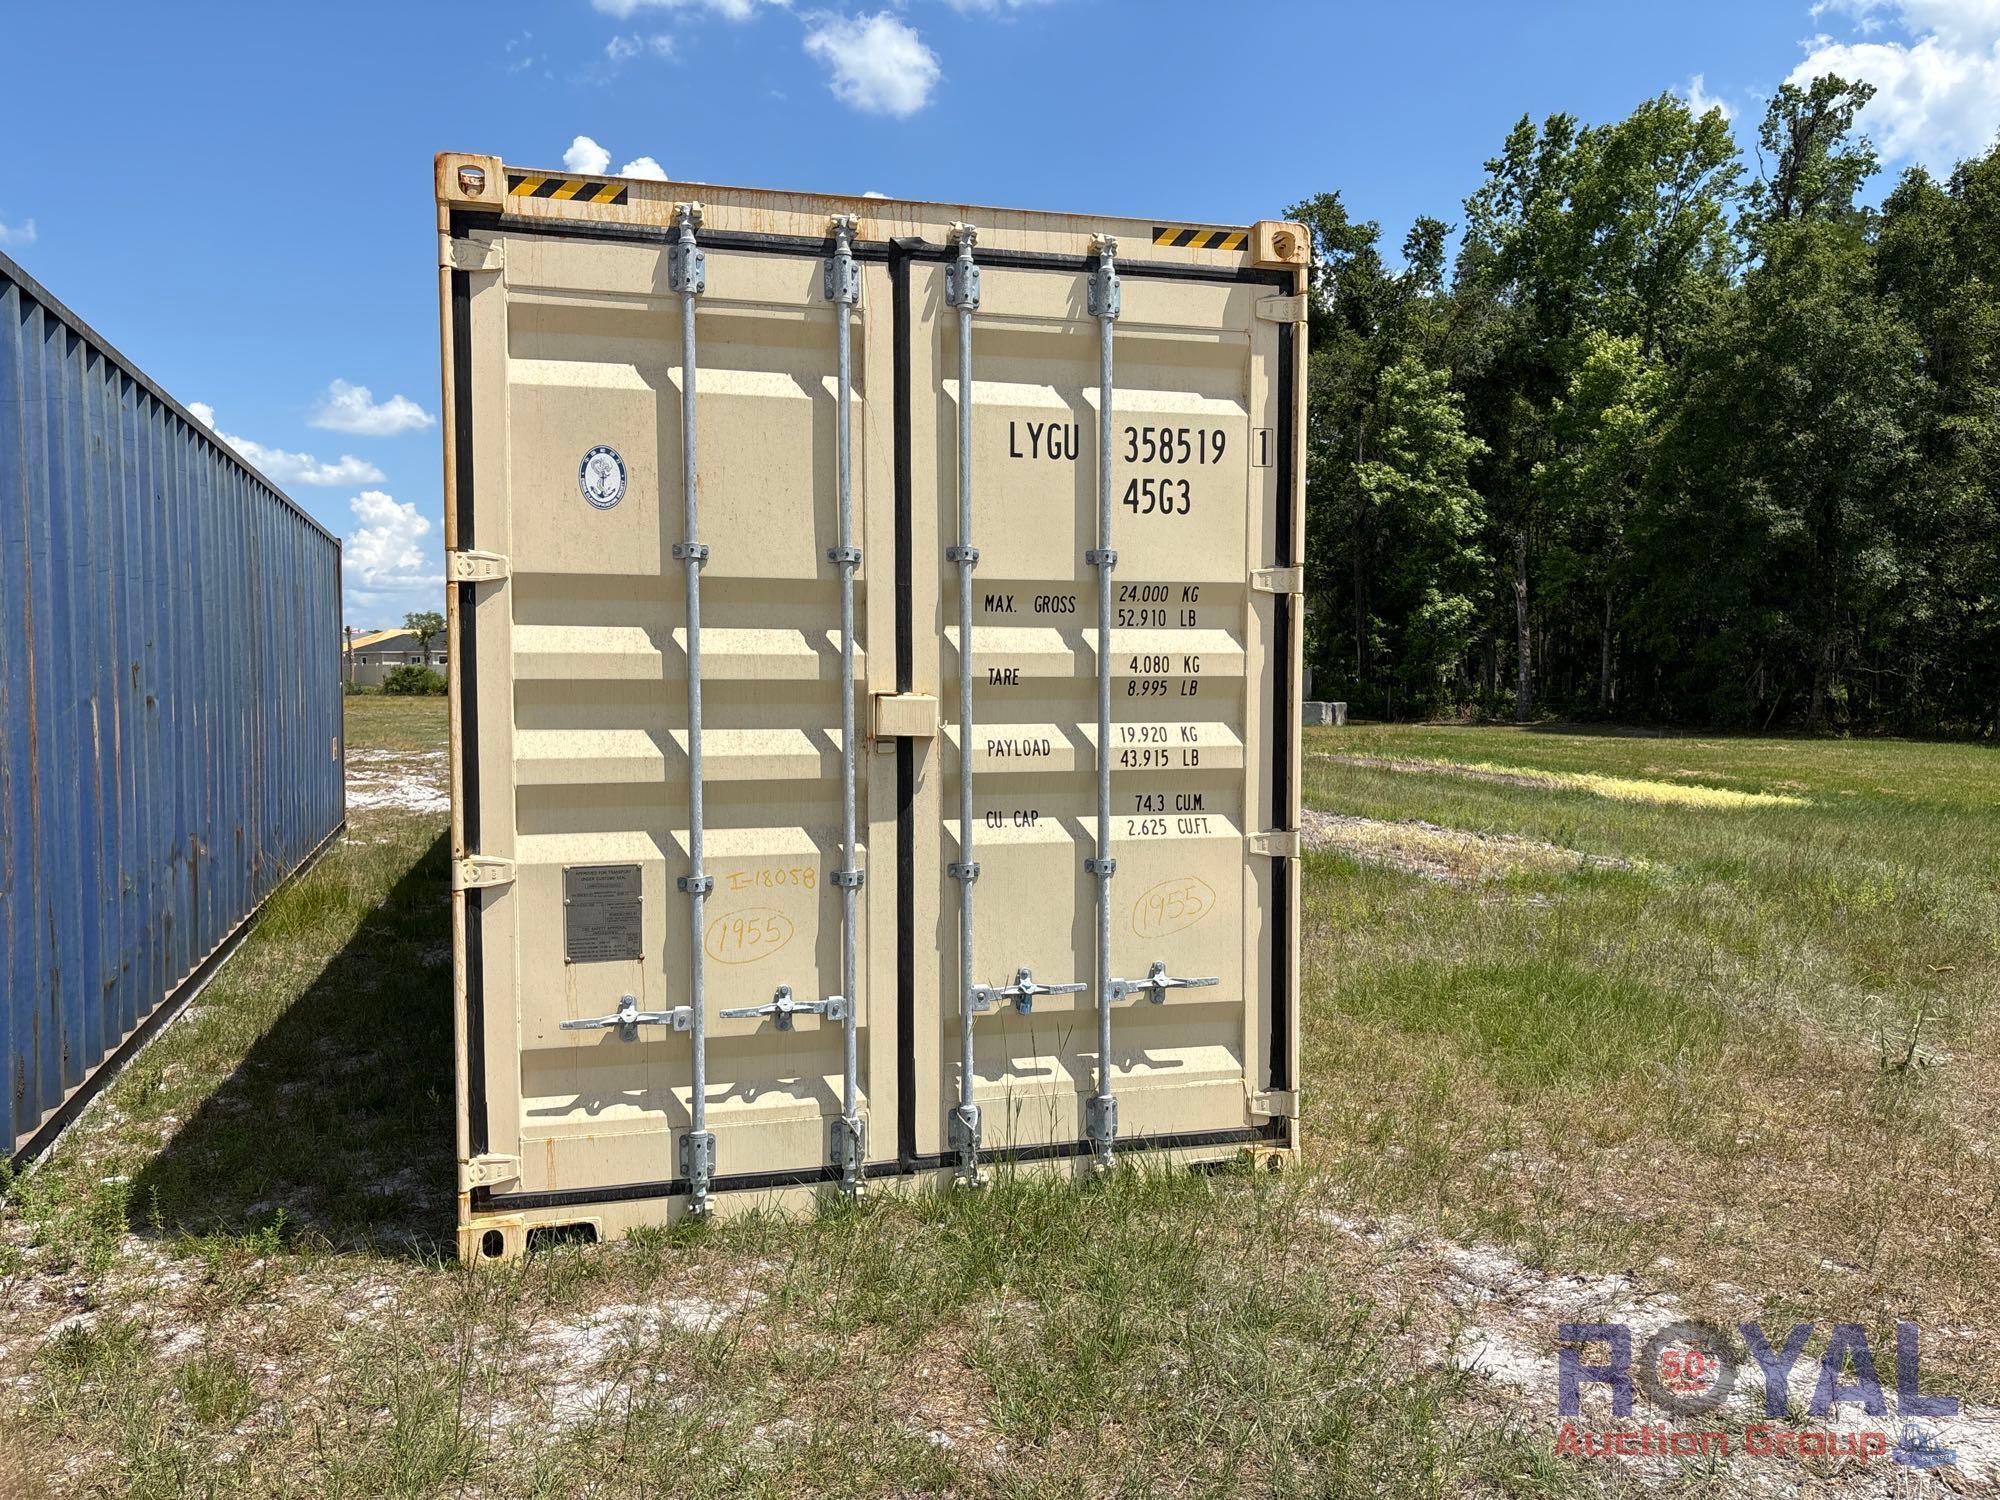 One Run 40 Ft 10 Door Shipping Container